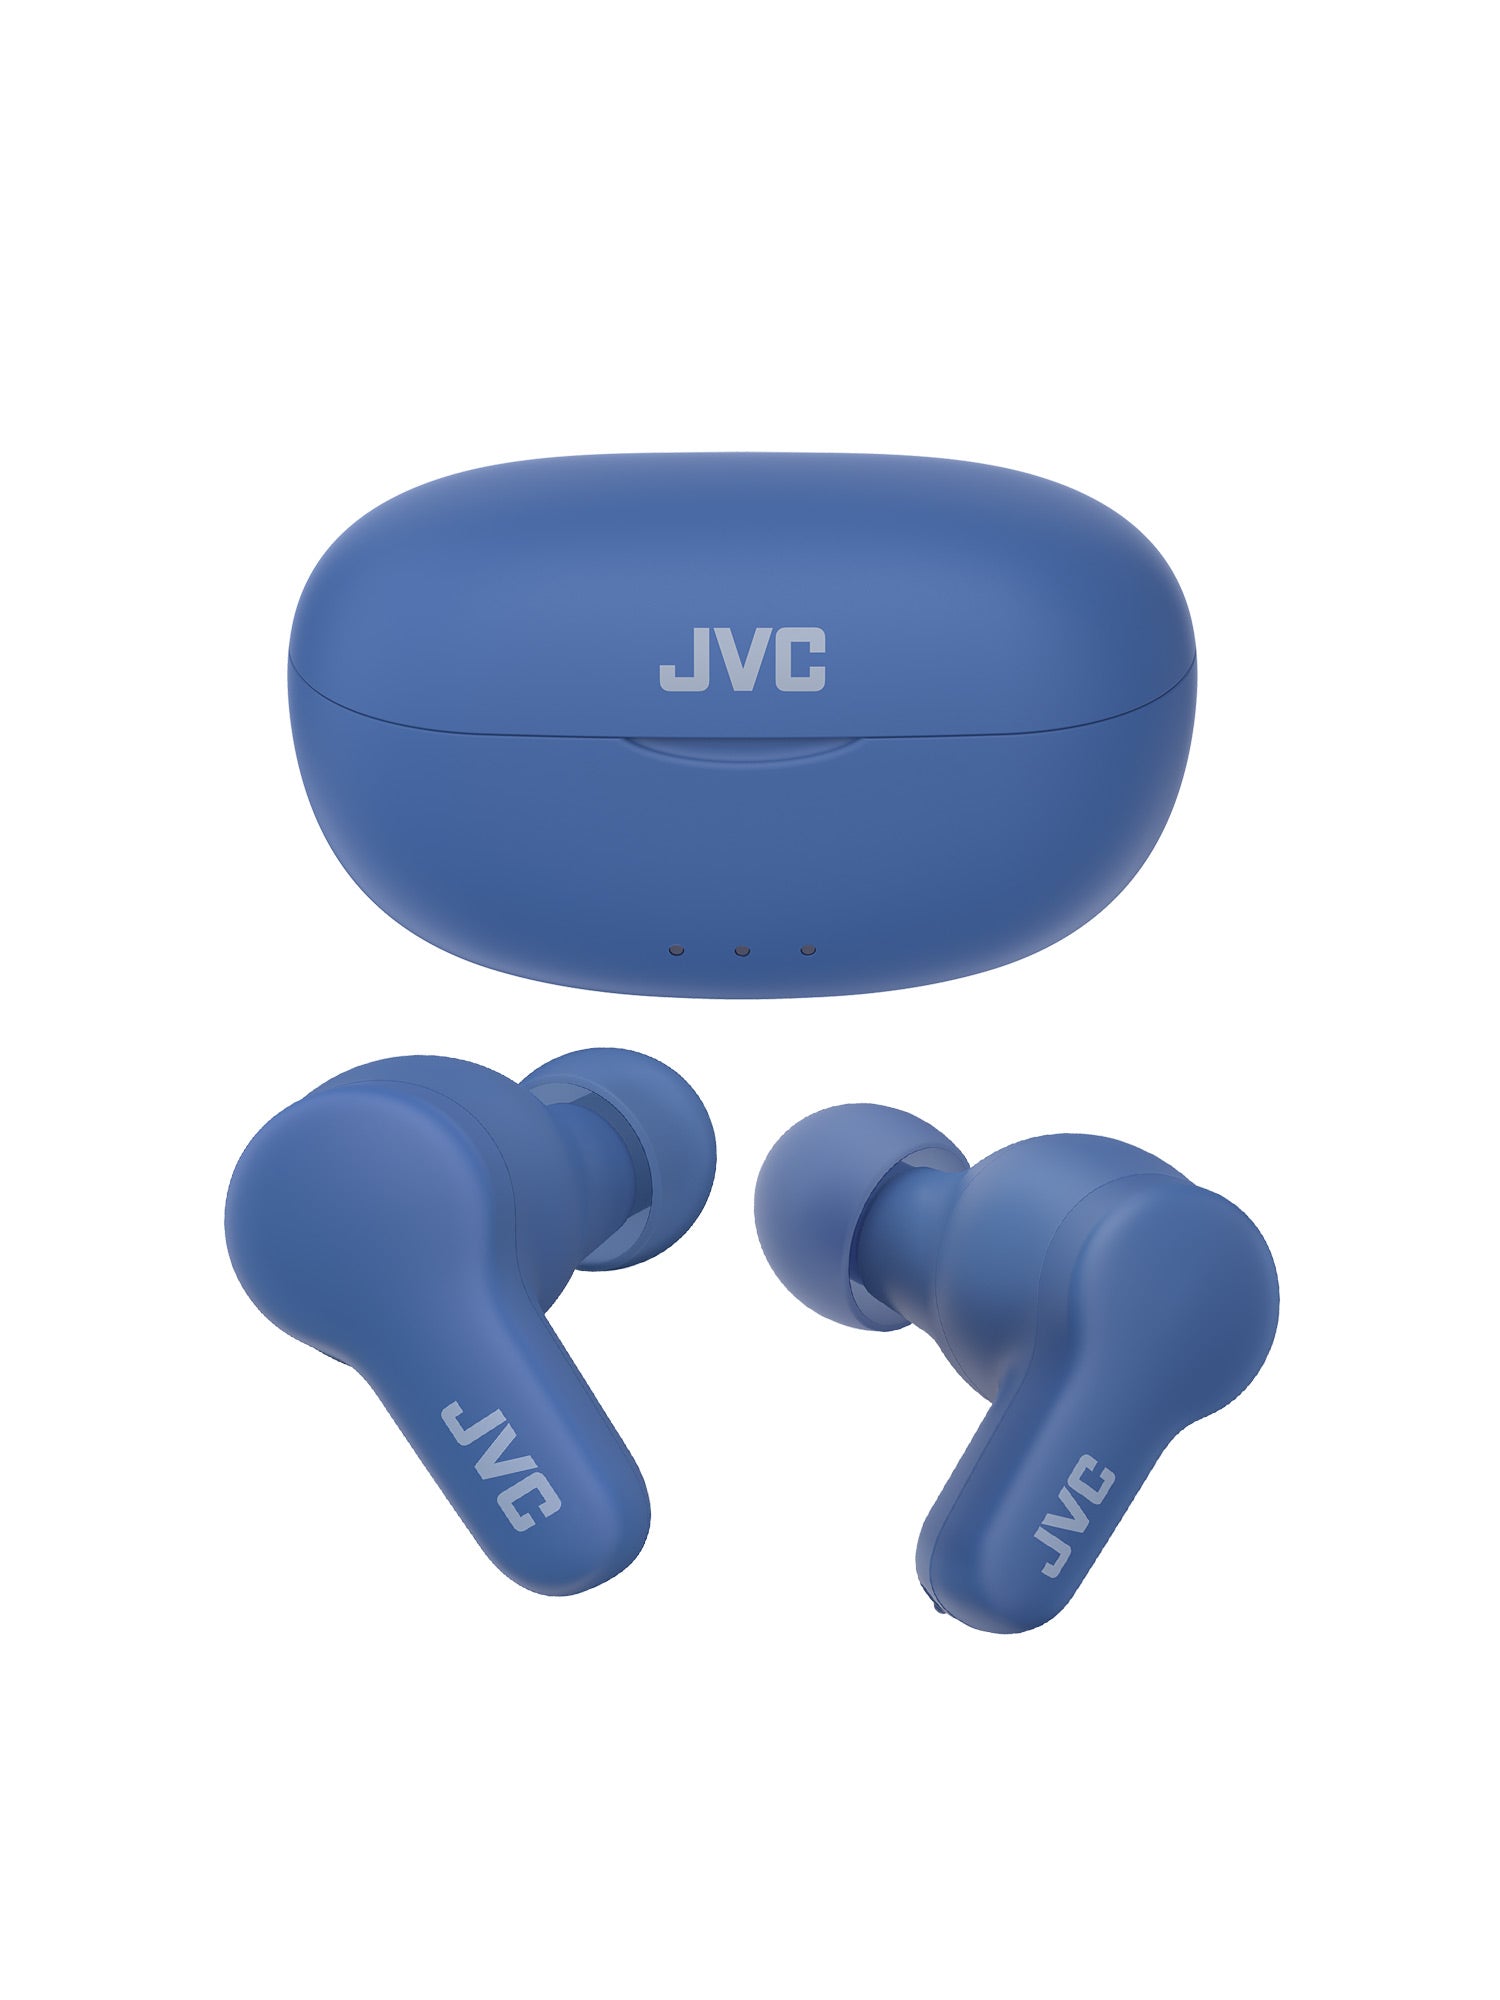 HA-A7T2 in blue wireless earbuds and charging case by JVC